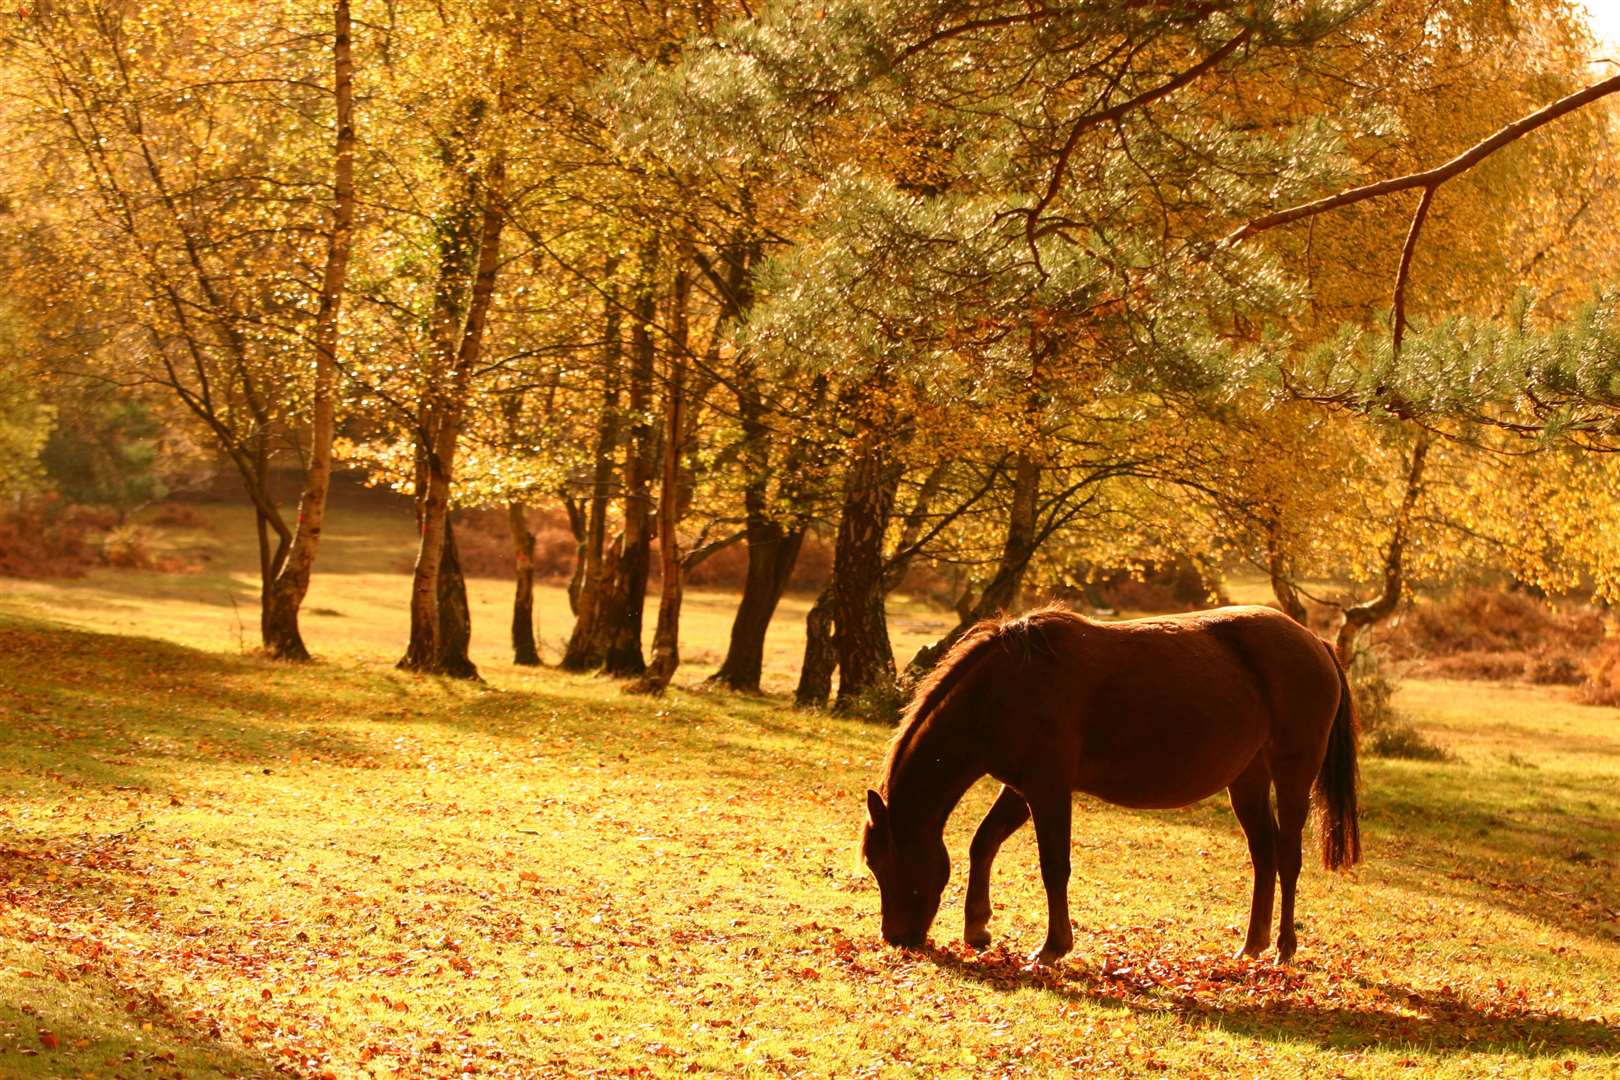 A horse in The New Forest.